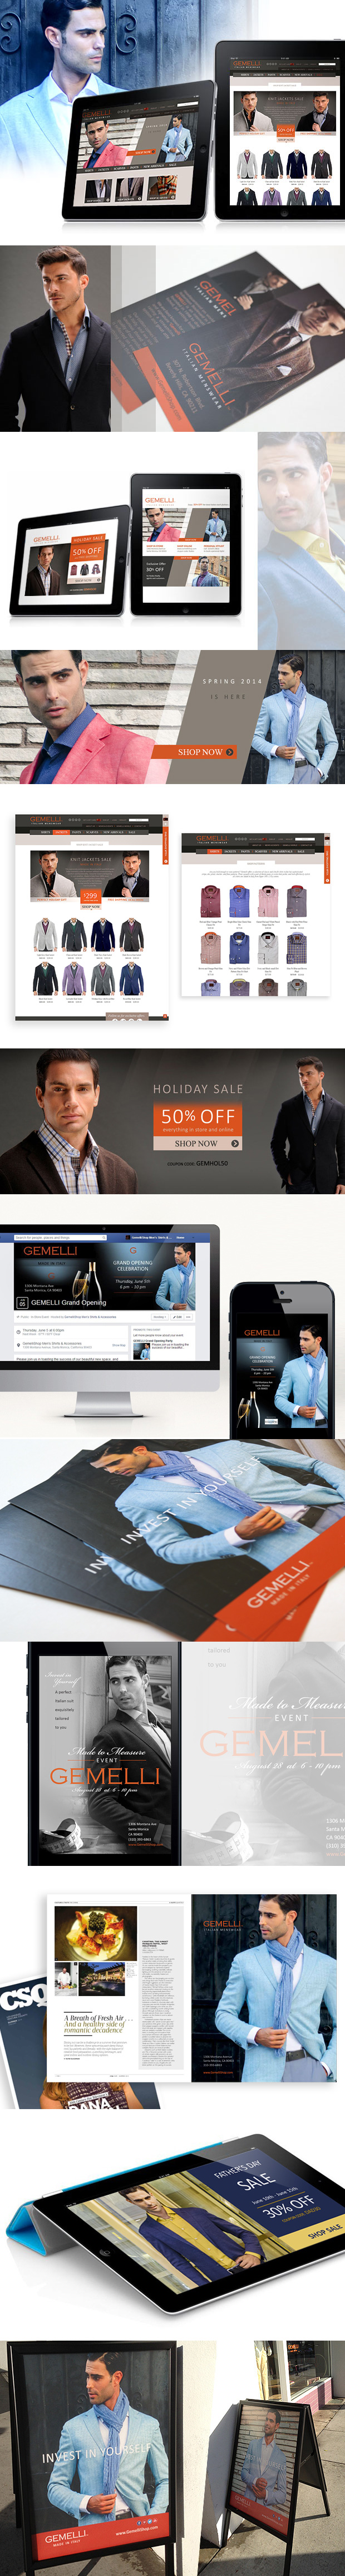 Graphic and web design for Gemelli